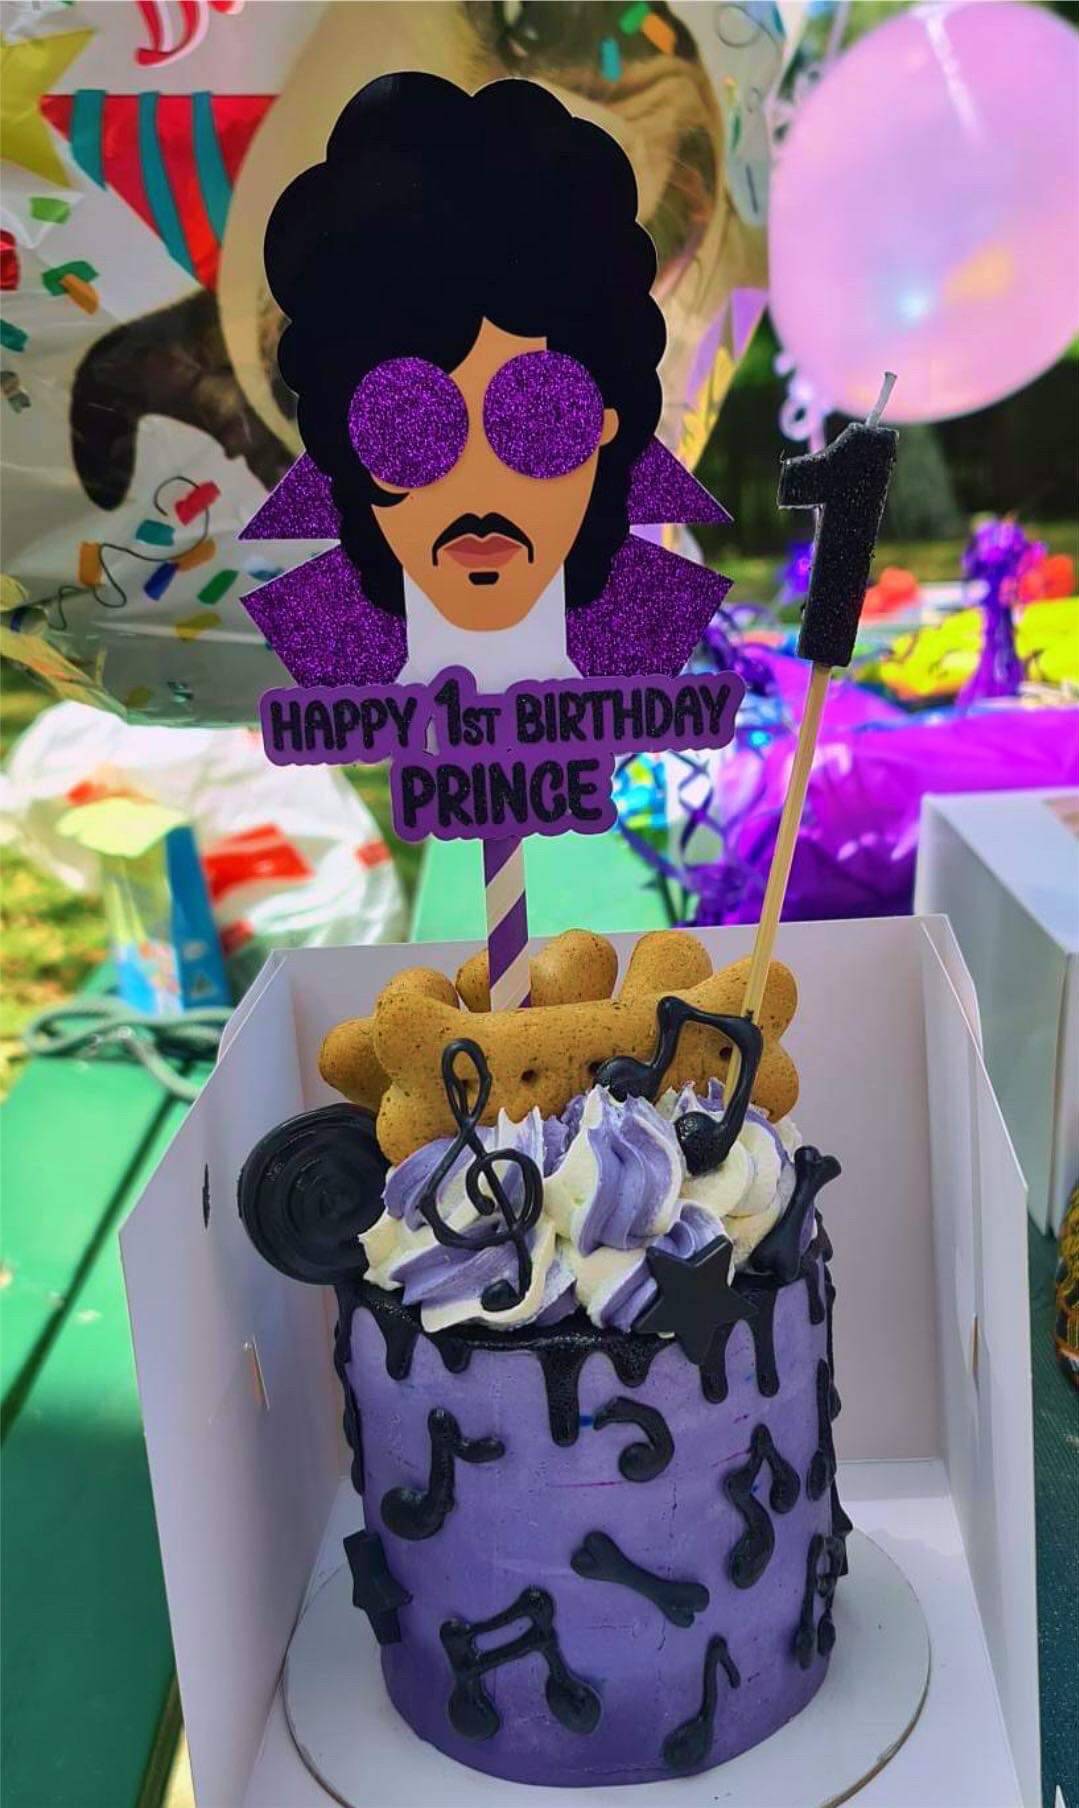 29 Best Prince cake ideas | prince cake, prince, prince party